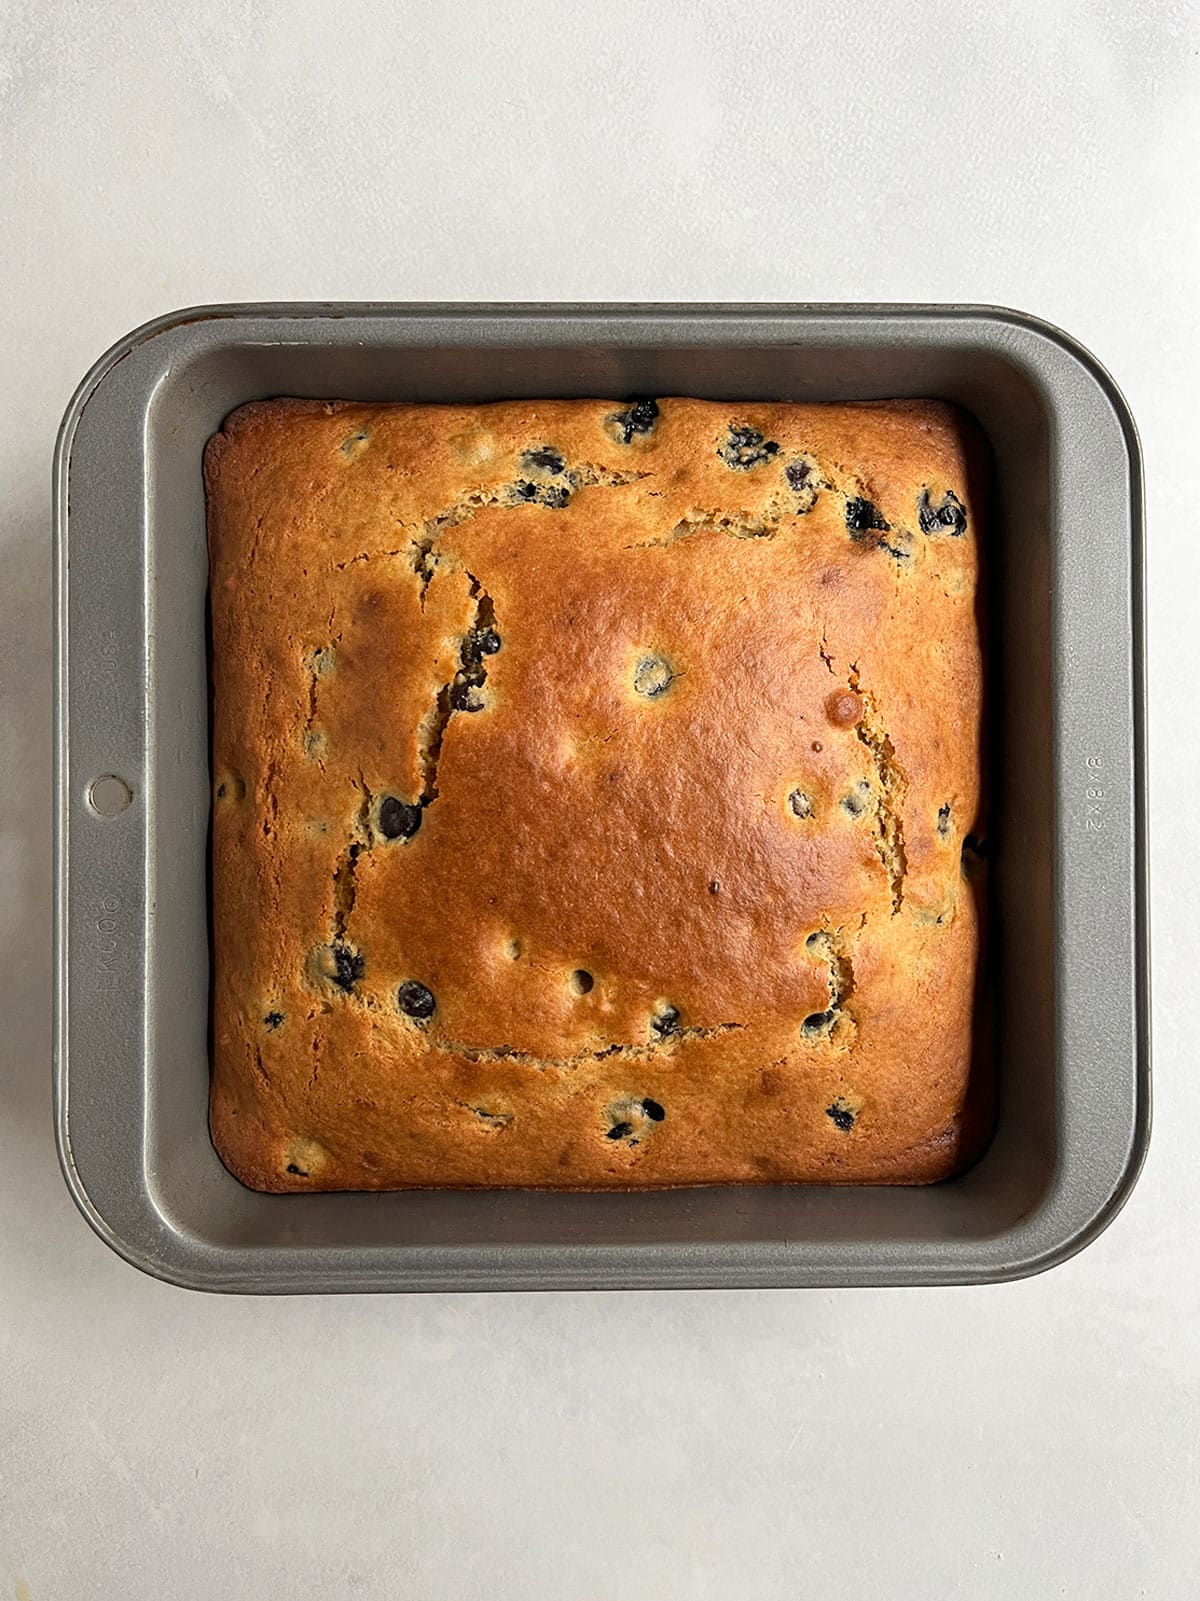 Blueberry tea cake baked and still in square cake pan.